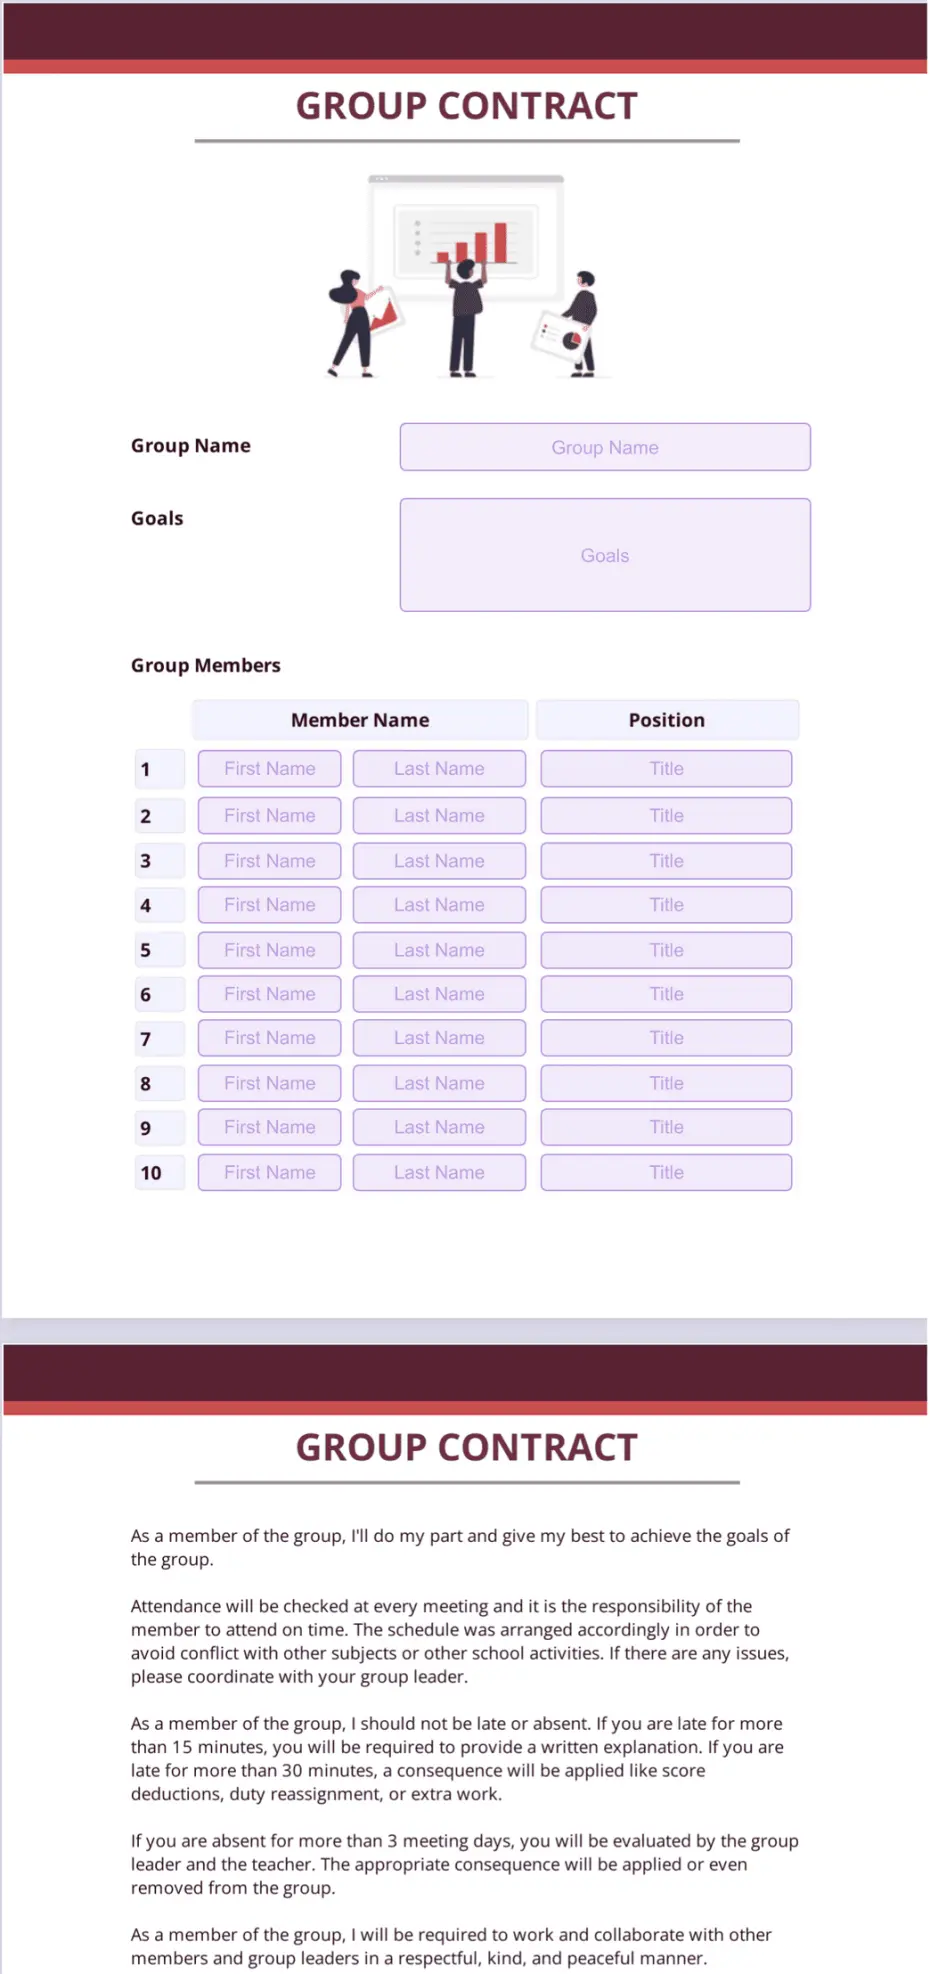 Group Contract